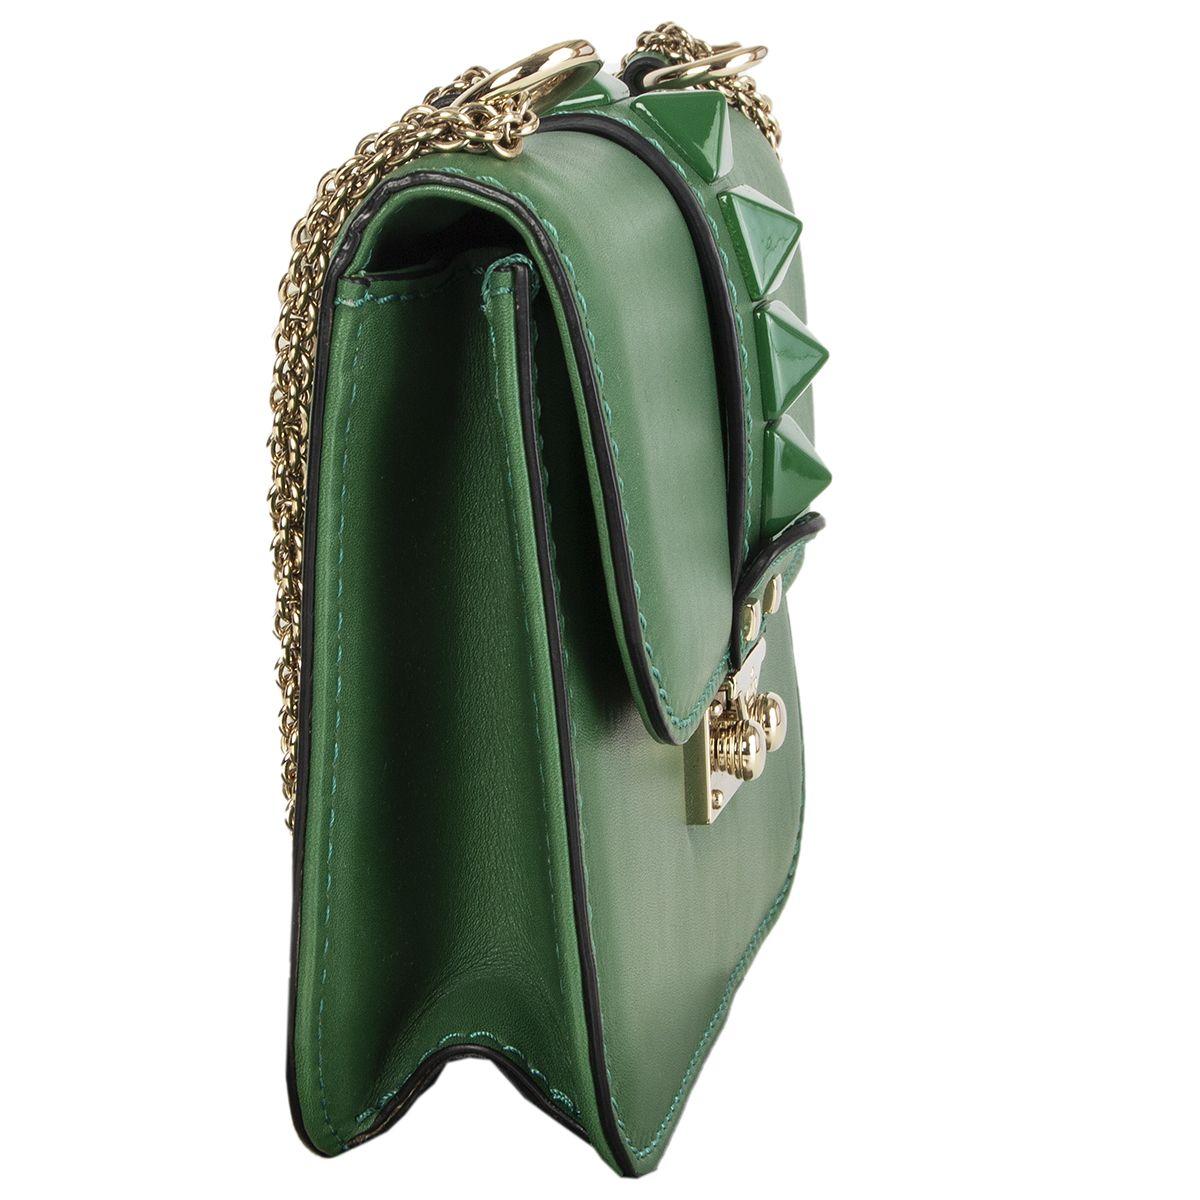 Valentino 'Glam Lock Rockstud Small' chain shoulder bag in green smooth calfskin featuring green ruthenium finish metal studs and loght gold-tone hardware. Opens with a tuck catch closure with engraved logo. Lined in beige canvas with one zip pocket